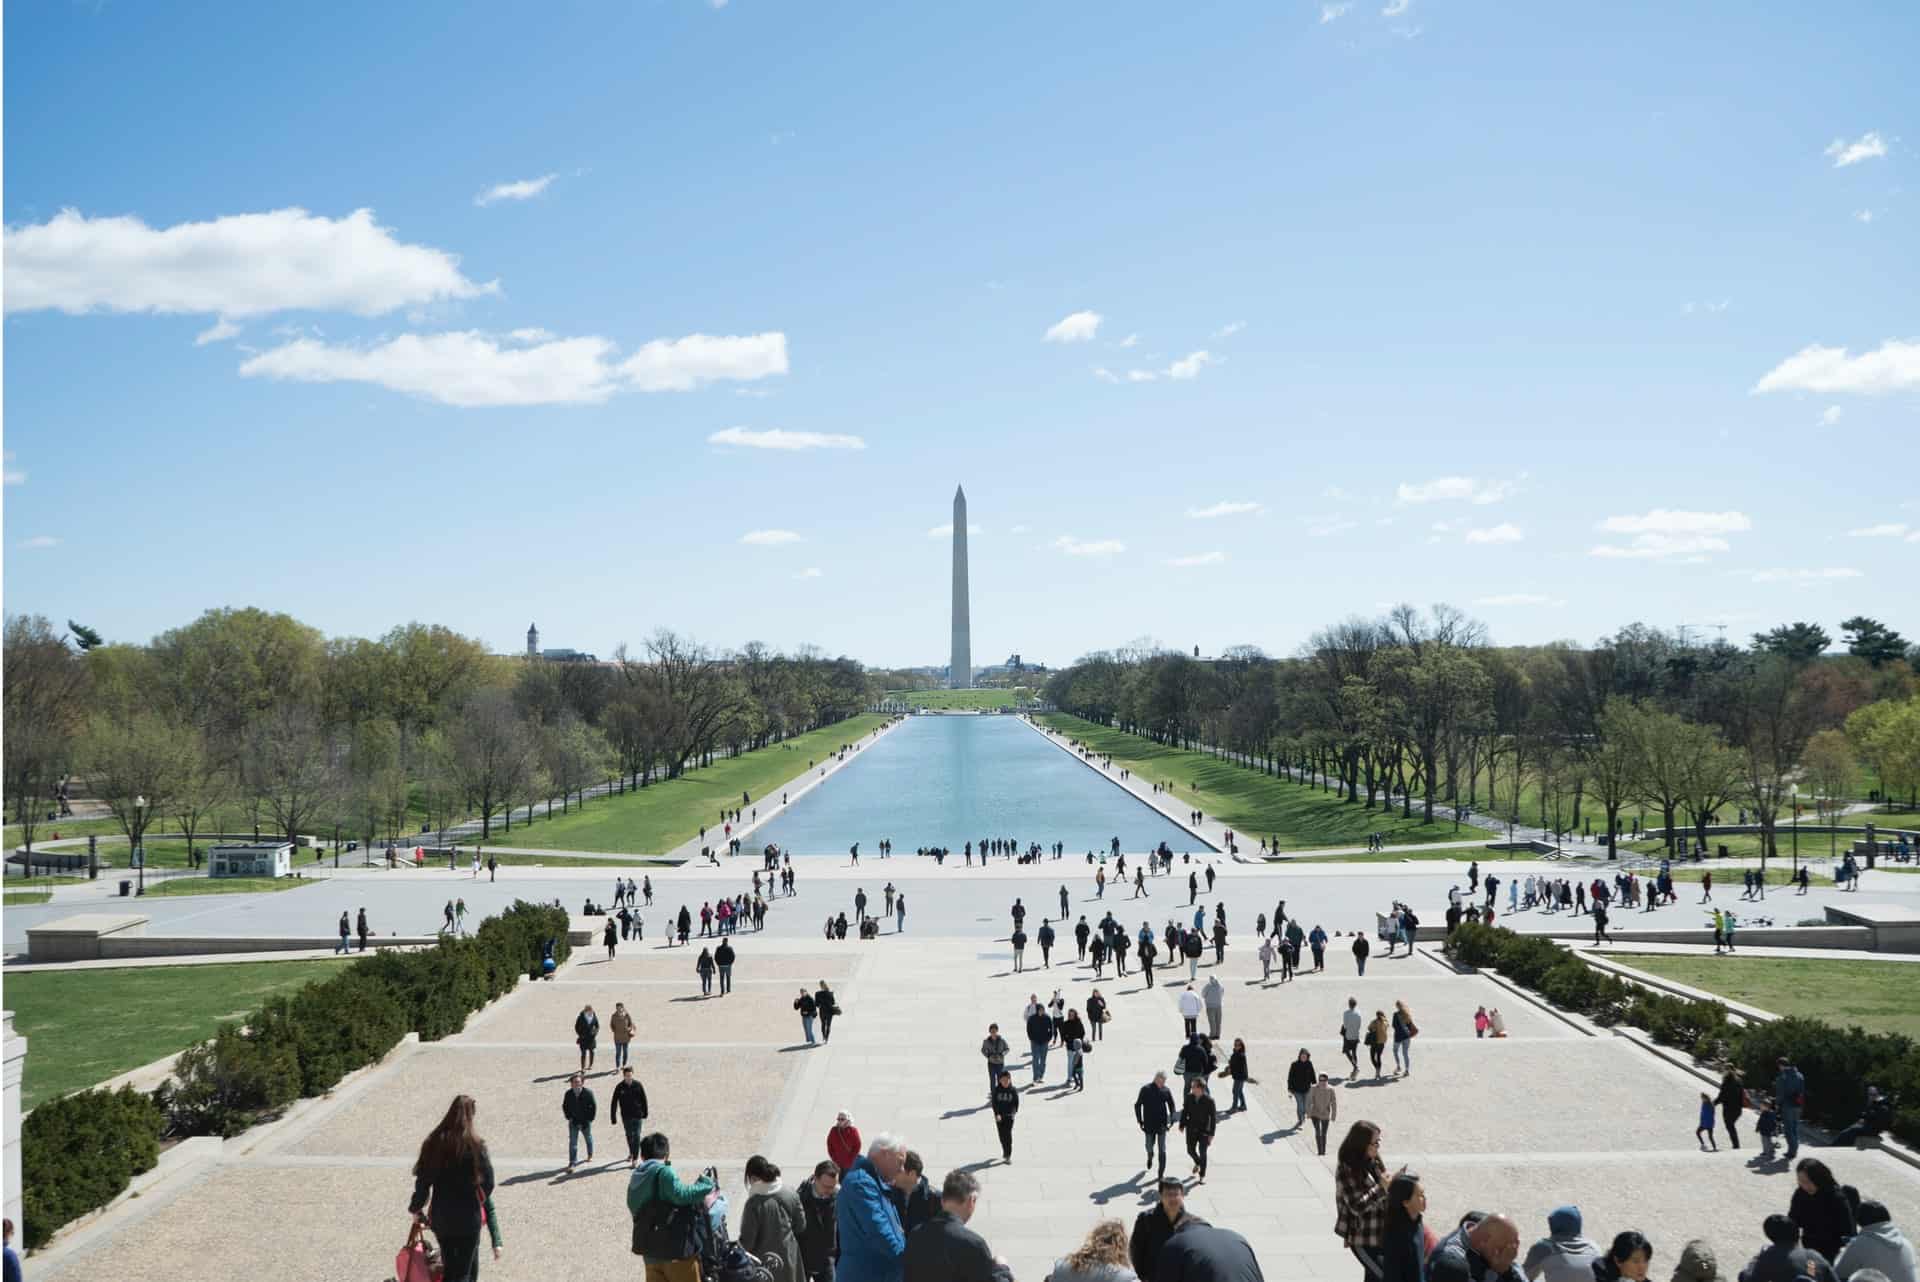 Best things to do in Washington DC - Mike Ferraco - National Mall from Lincoln Memorial steps by Jacob Creswick on Unsplash